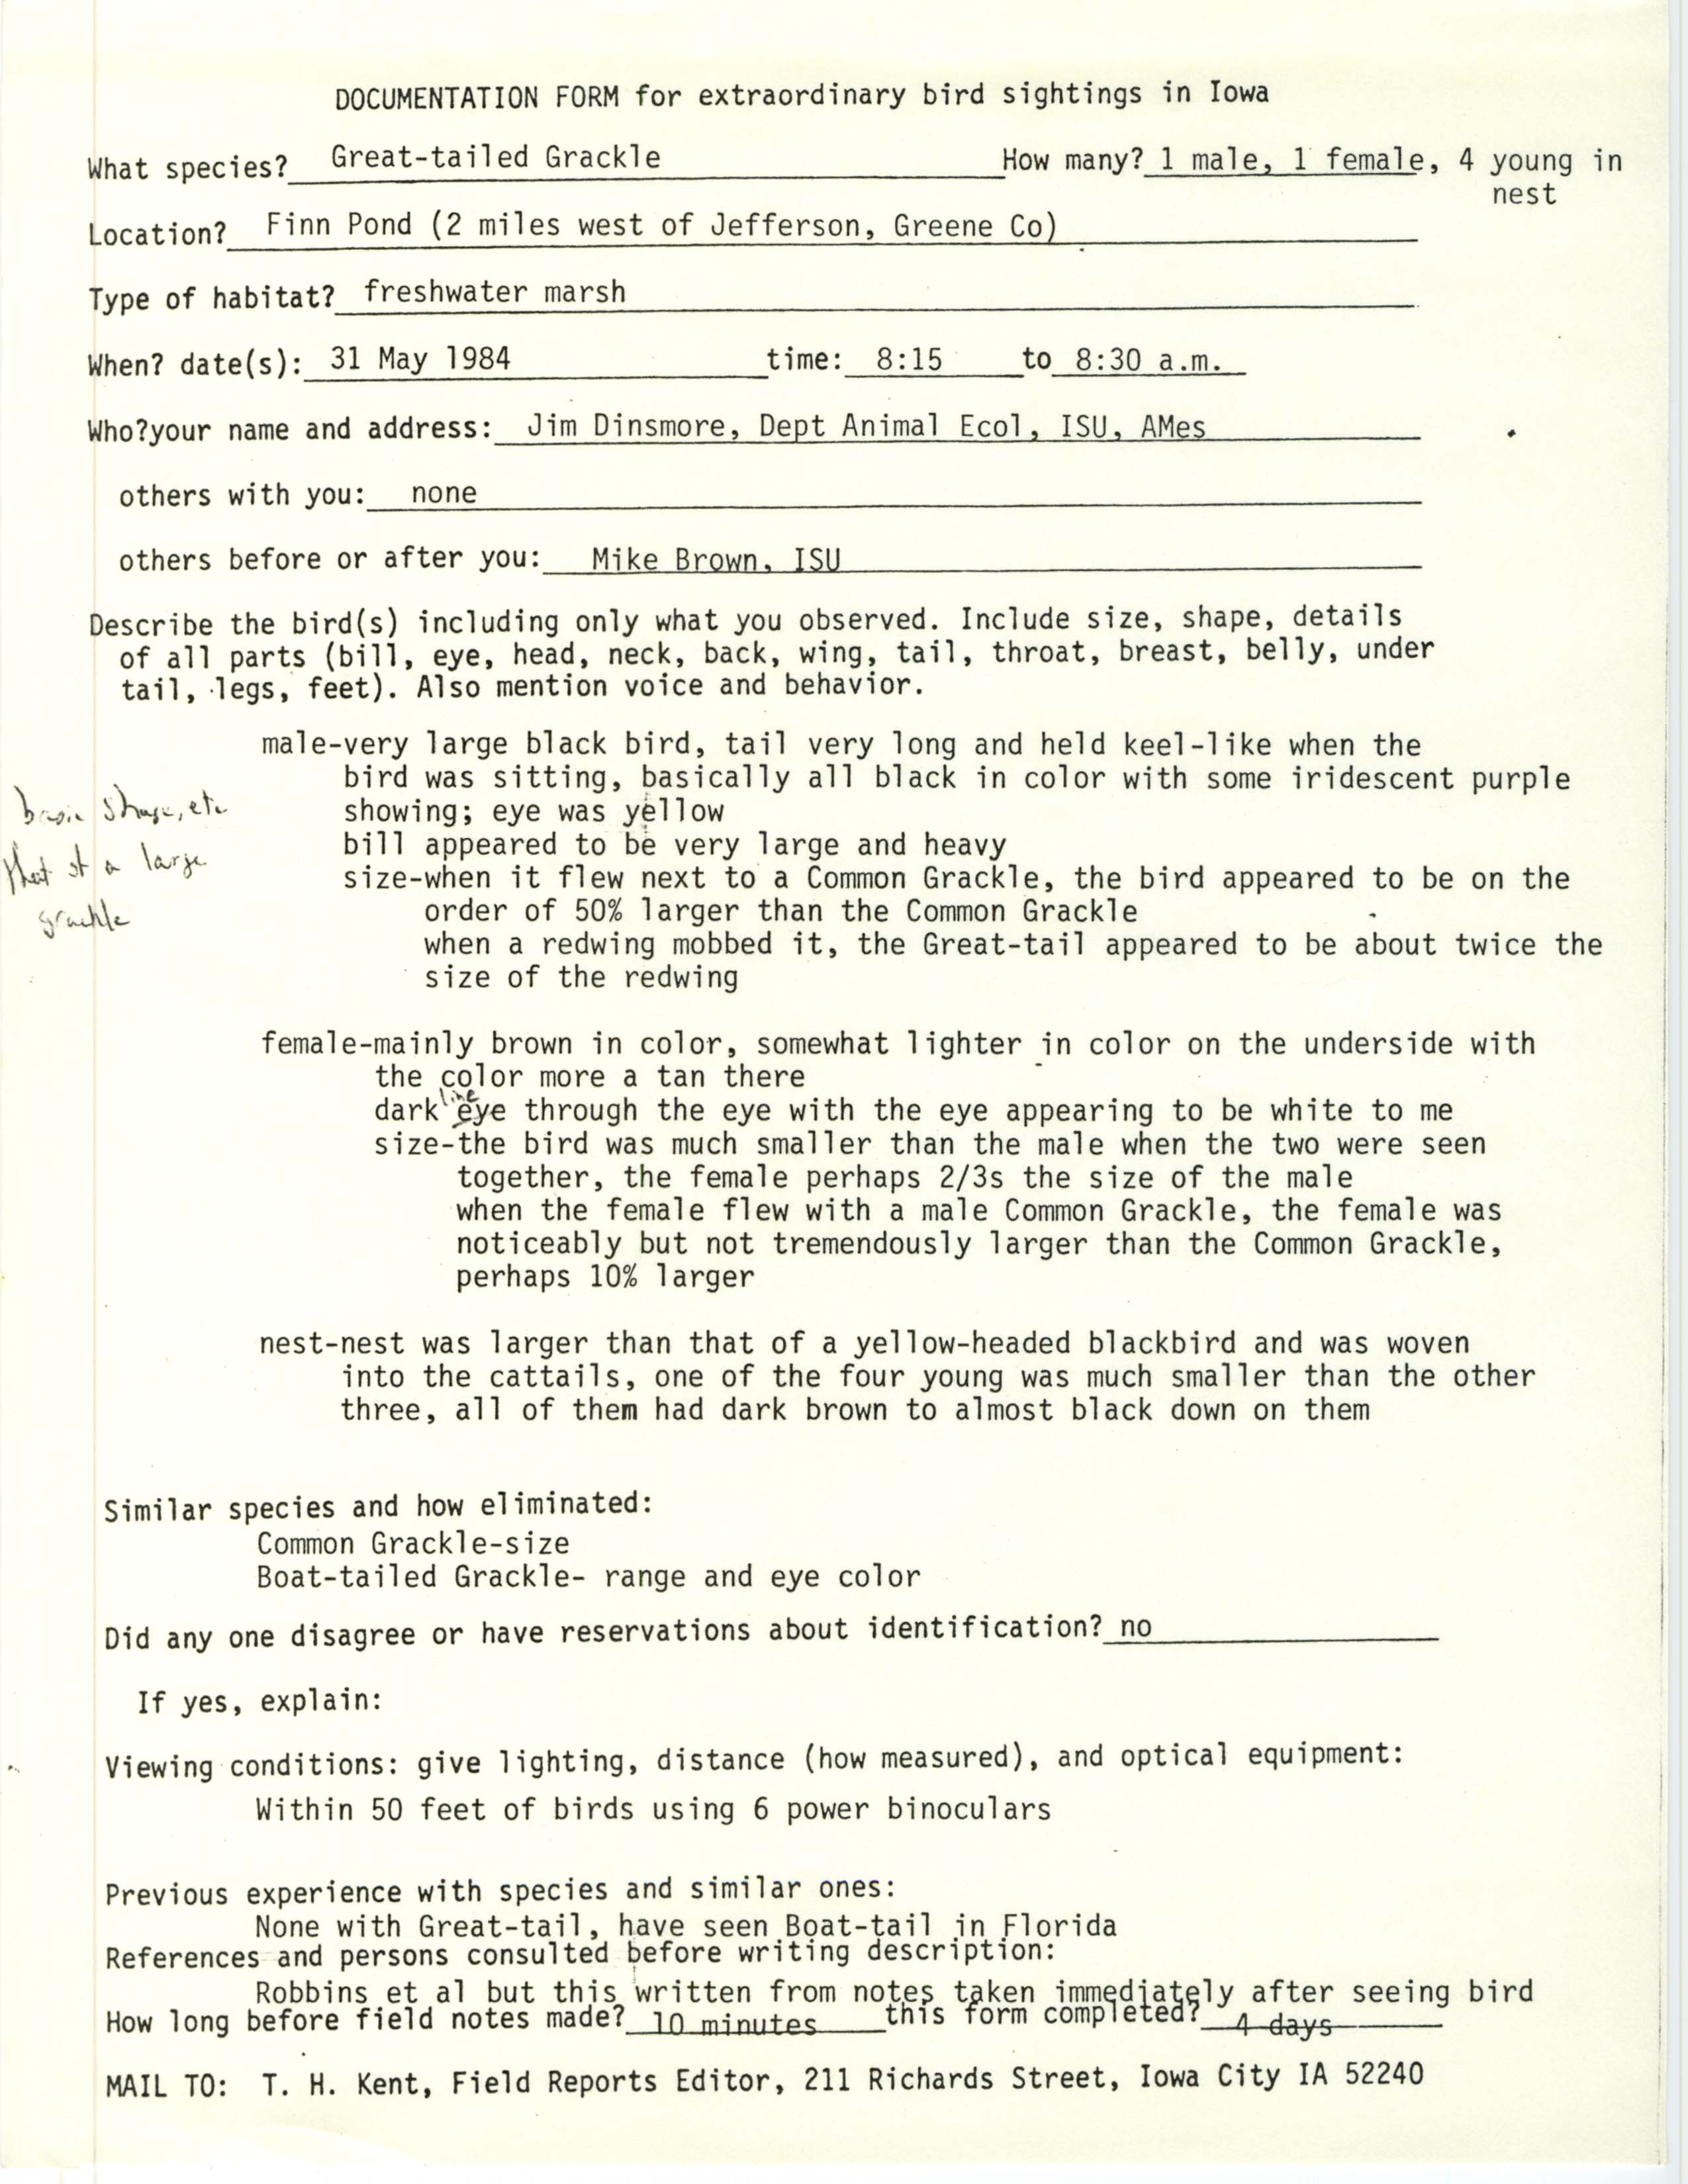 Rare bird documentation form for Great-tailed Grackle at Finn Pond in Greene County, 1984